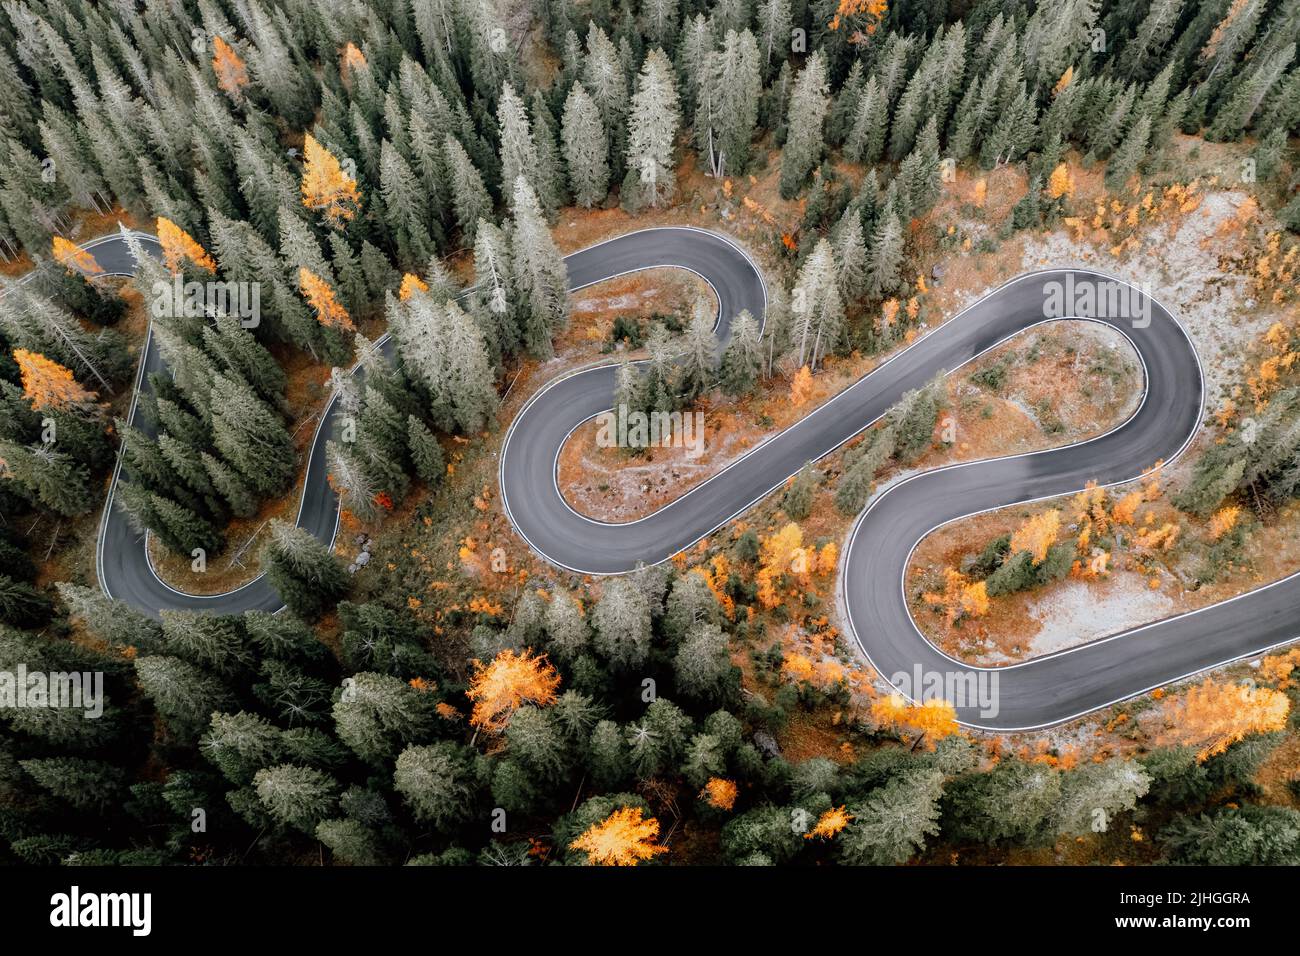 Top aerial view of famous Snake road near Passo Giau in Dolomite Alps. Winding mountains road in lush forest with orange larch trees and green spruce in autumn time. Dolomites, Italy Stock Photo